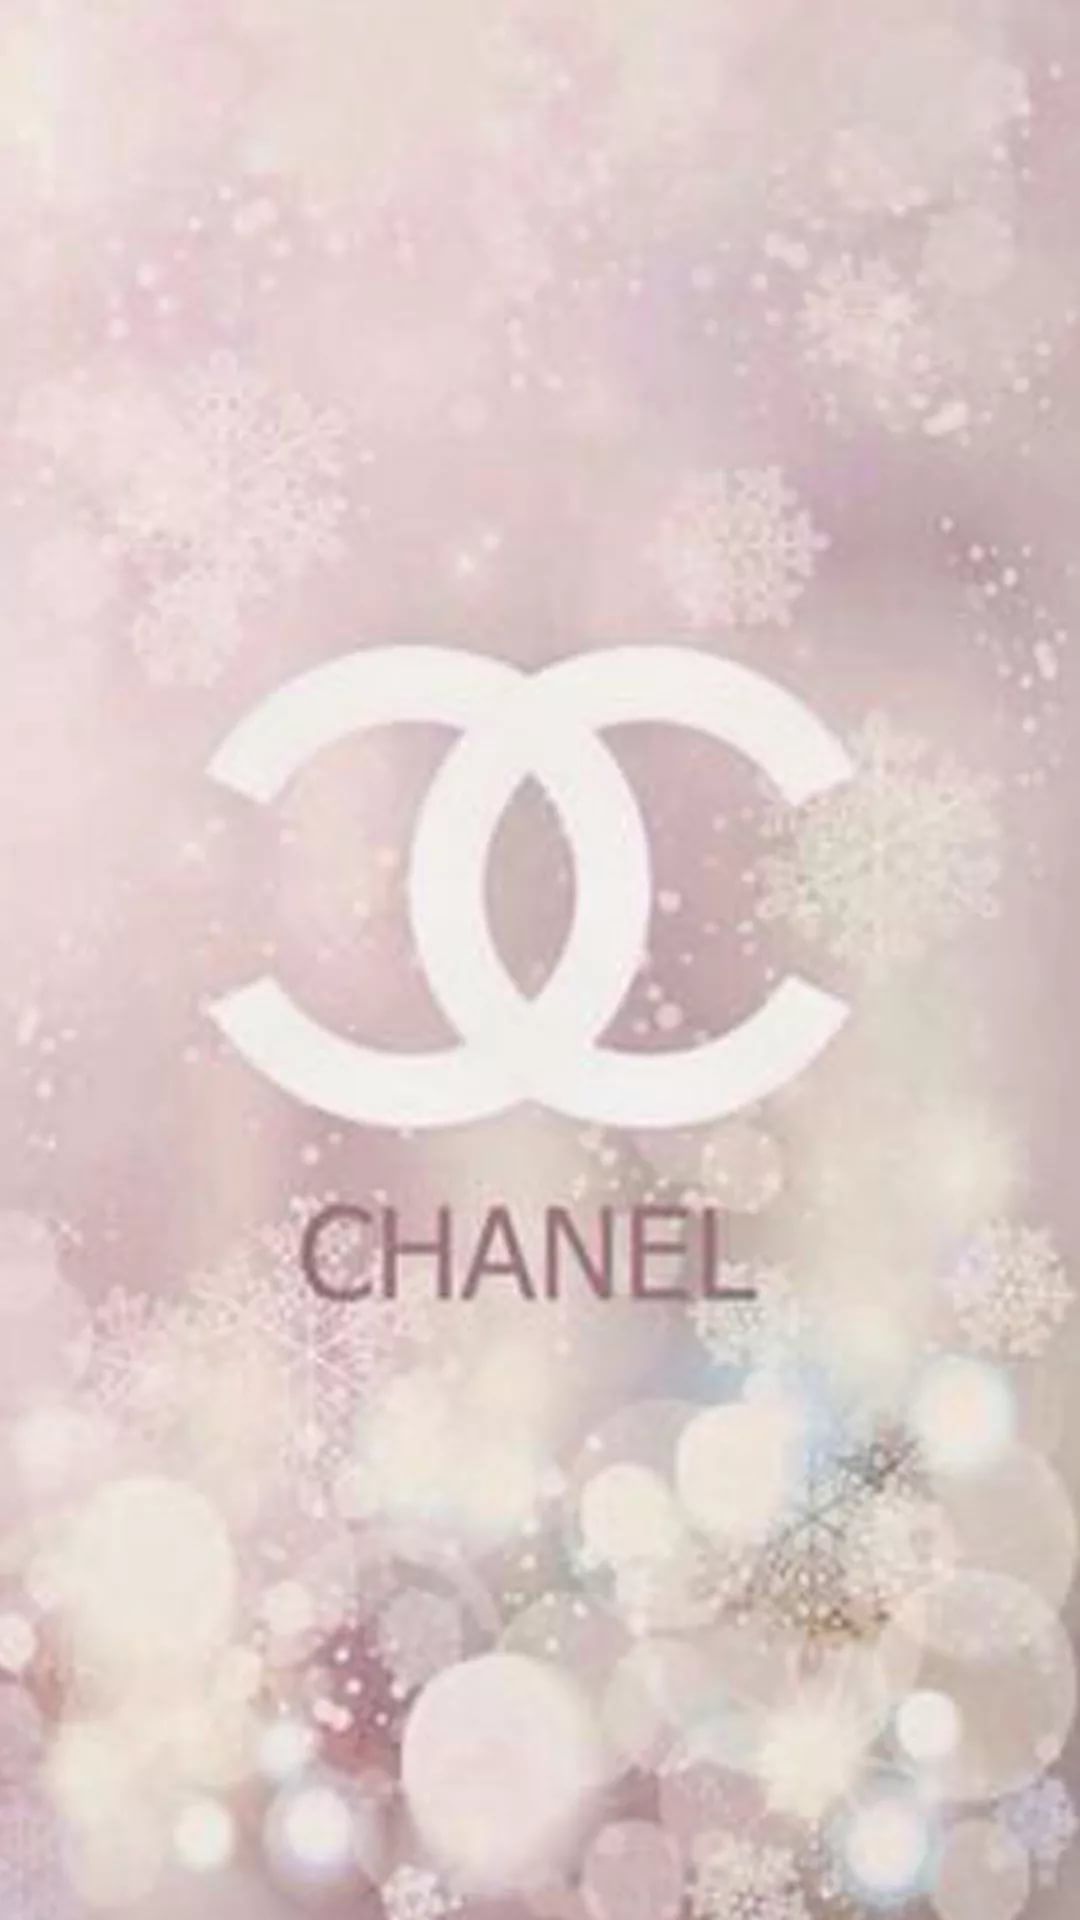 Chanel Background phone wallpaper